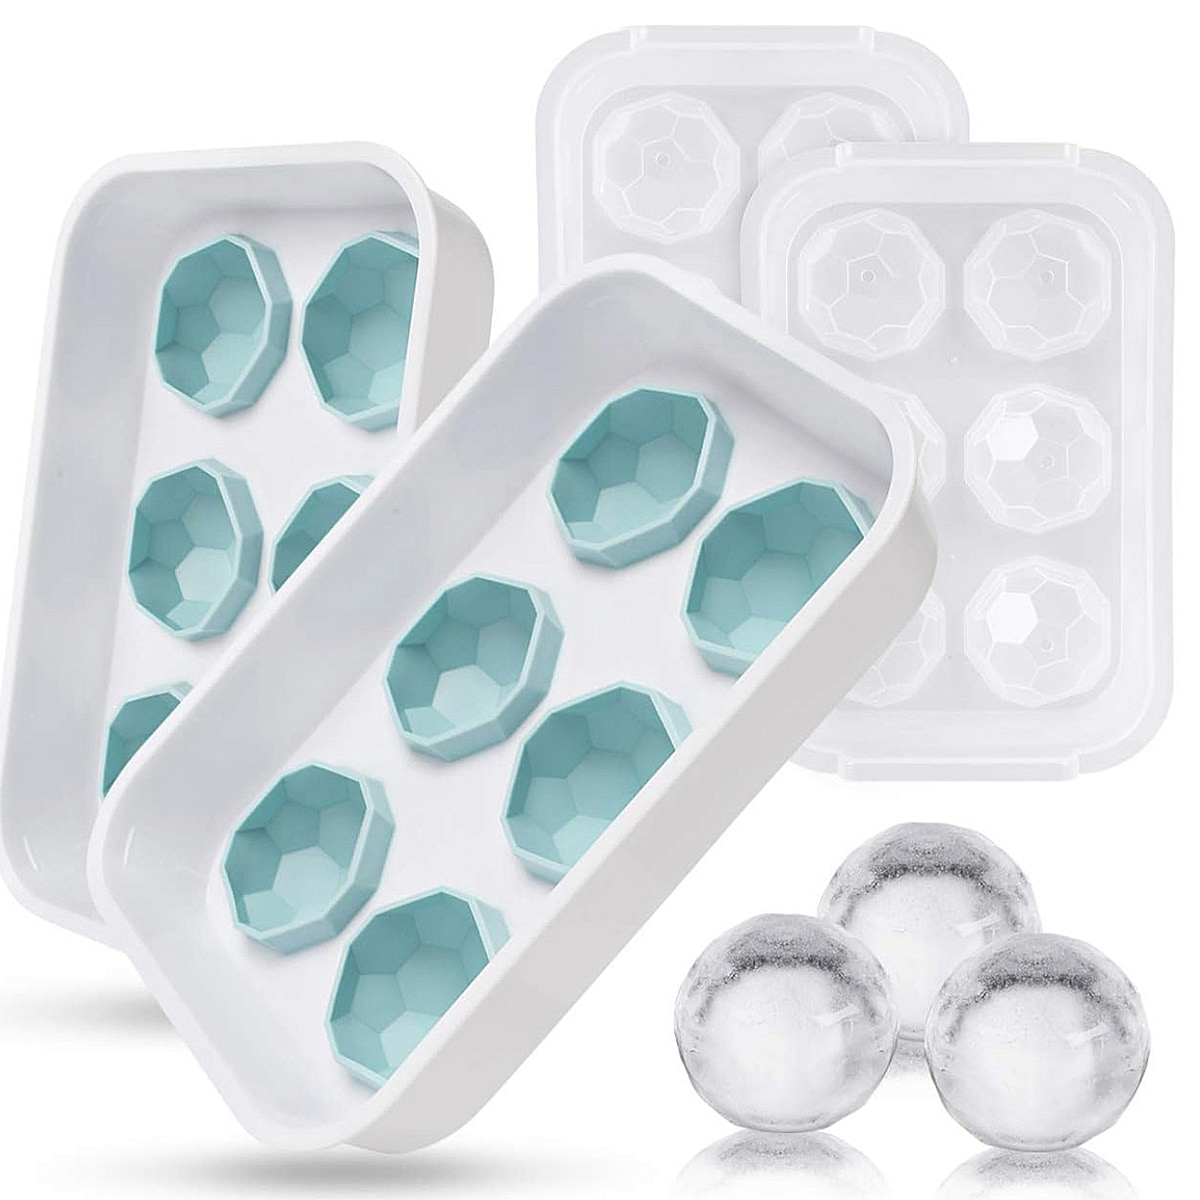 2-Football-Ice-Cube-Tray-(Makes-12-Ice-Cubes)-(Size-20x14cm)-Blue